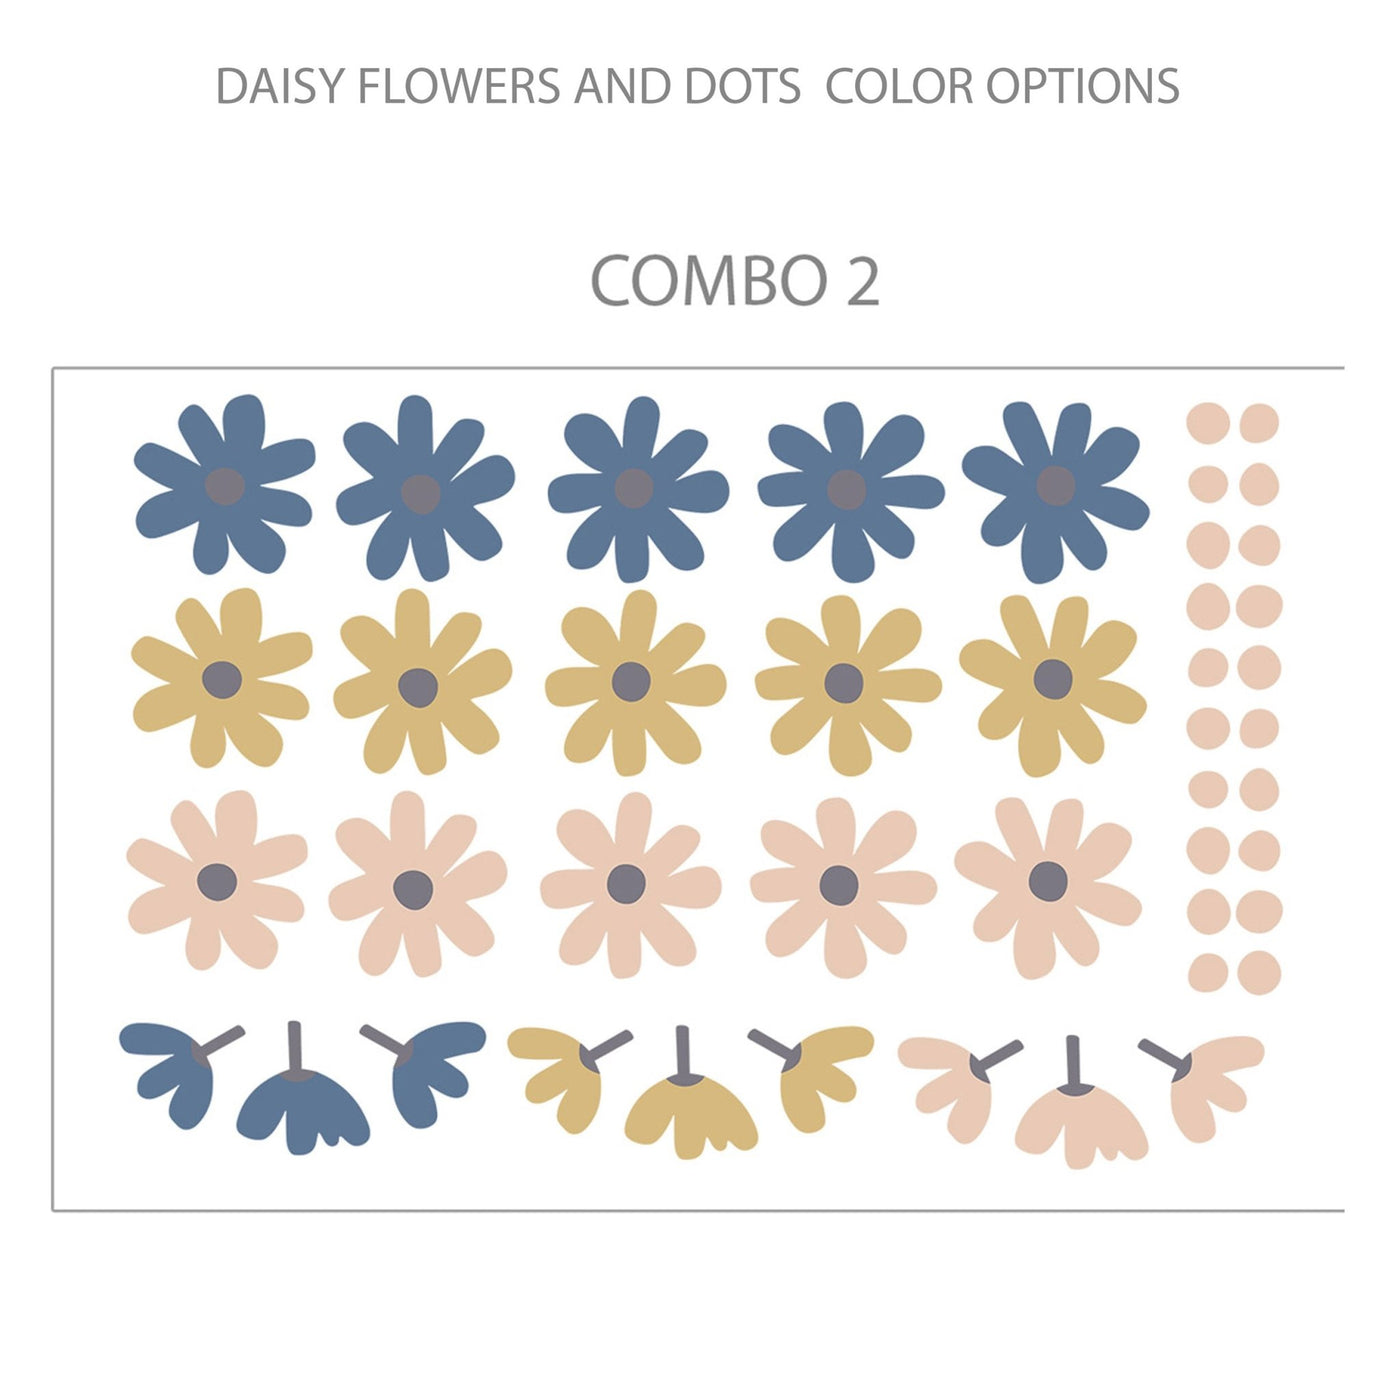 Daisy Flowers and Polka Dot Wall Stickers Colour Combo 2 - Jack Harry and Ollie